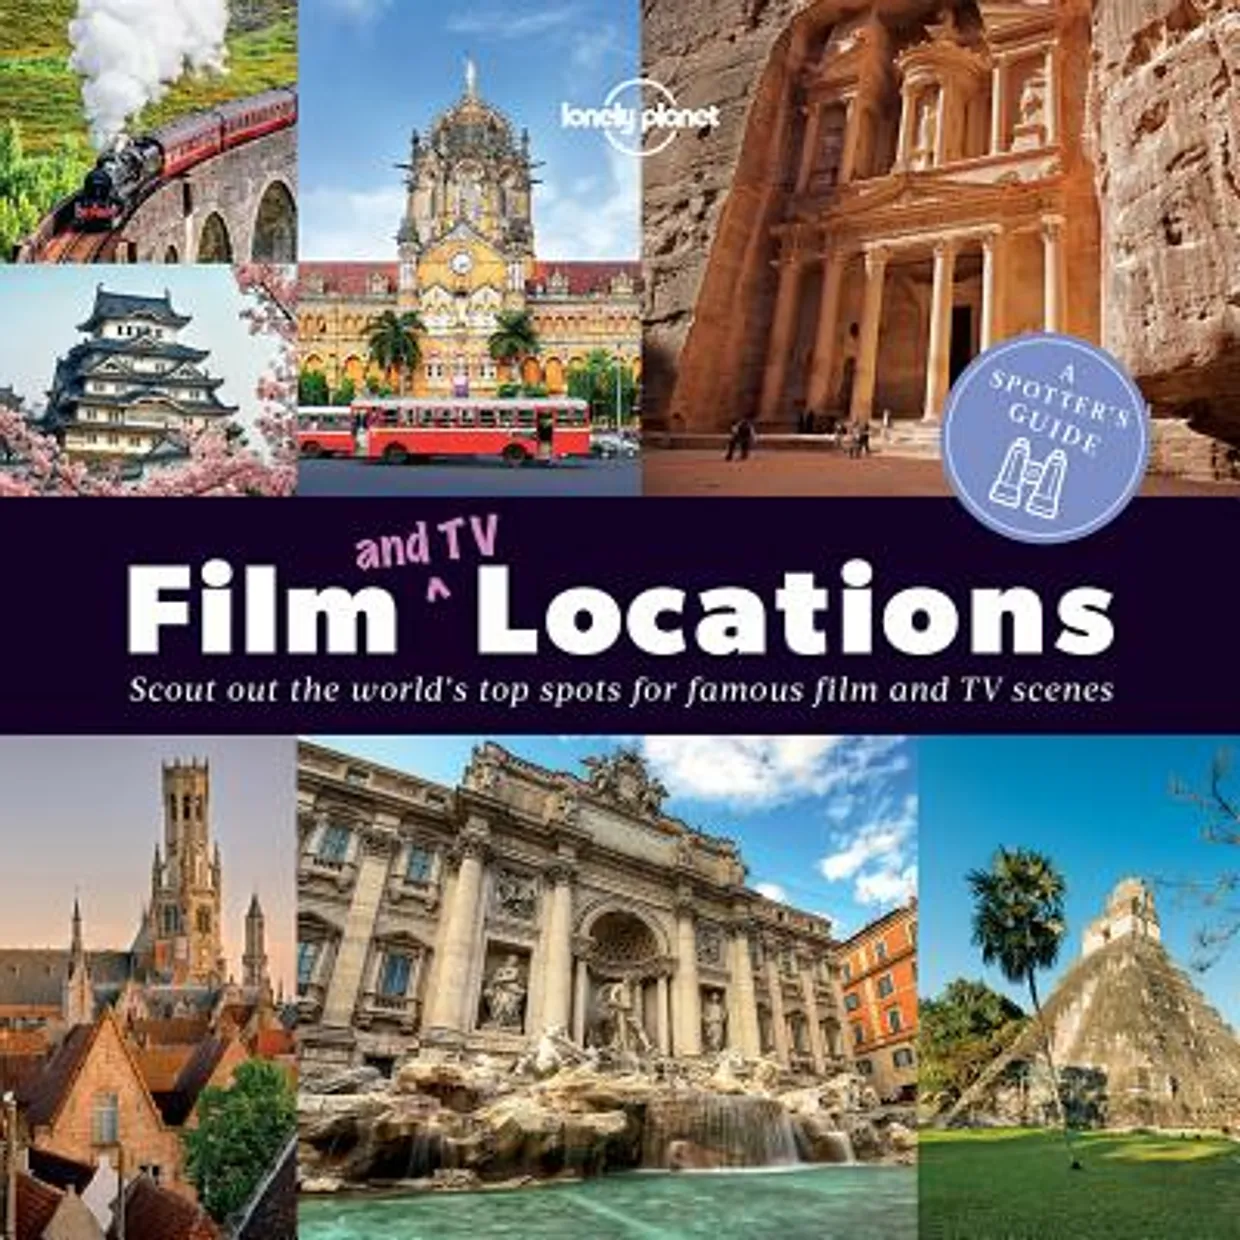 Spotter's Guide Film and TV Locations